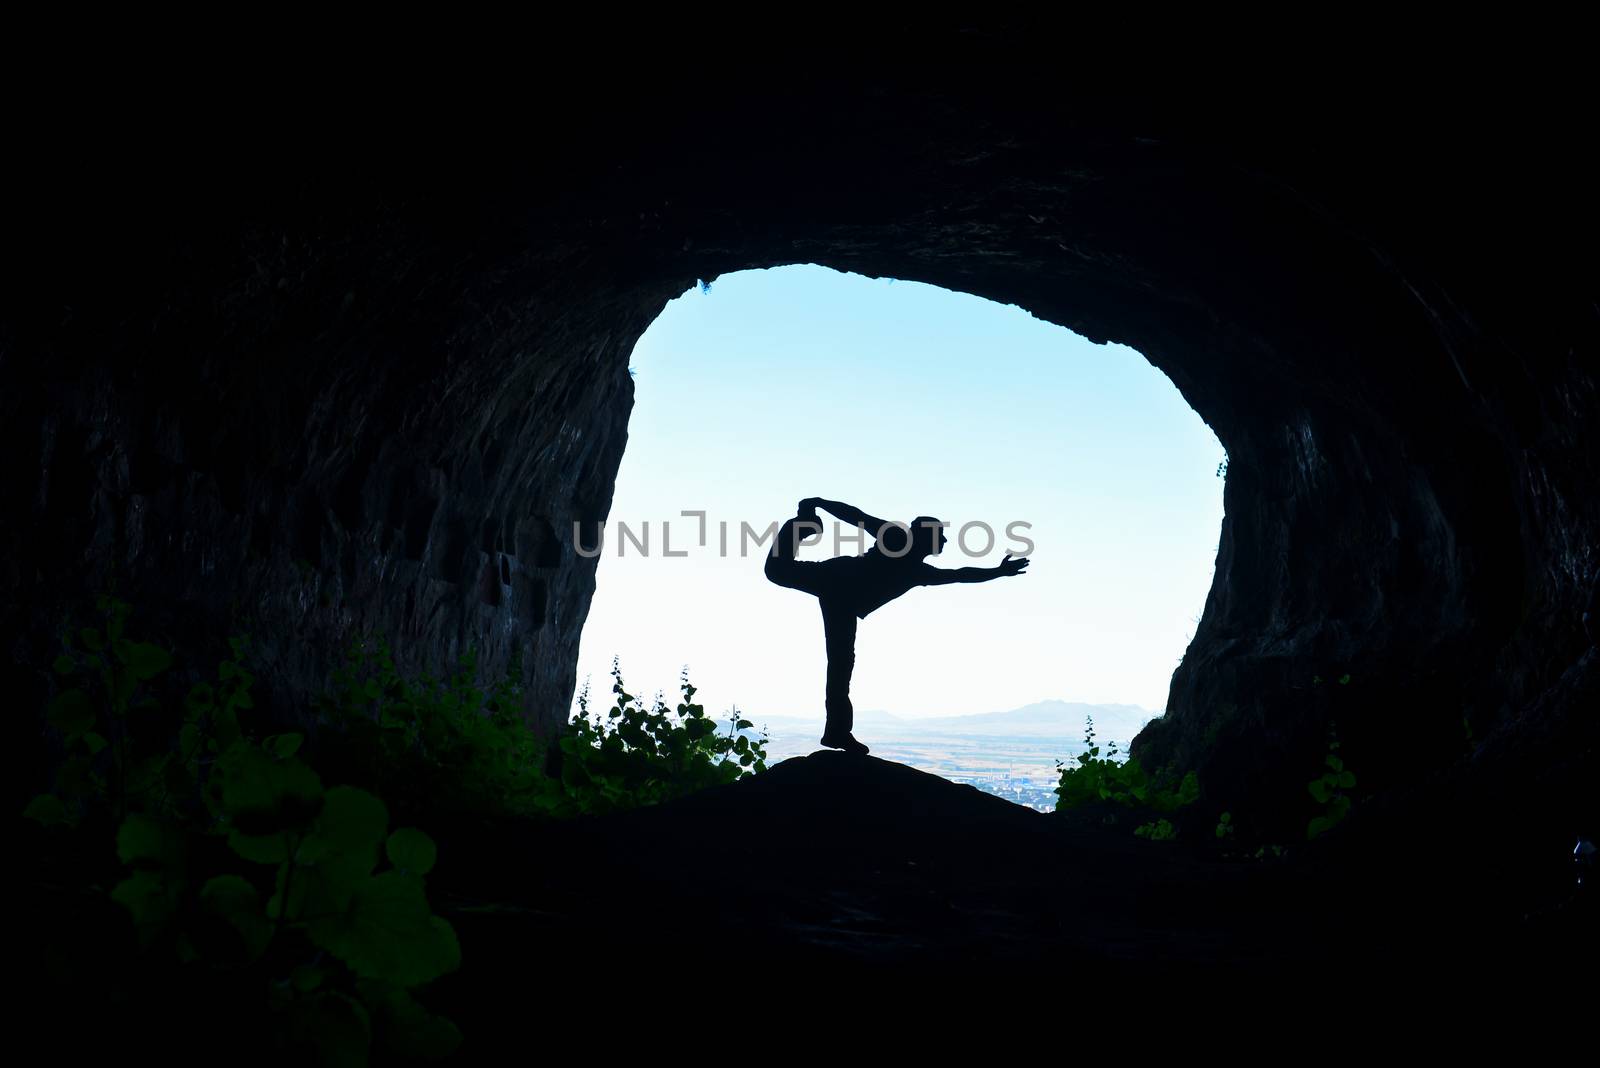 yoga positions and therapy in the cave